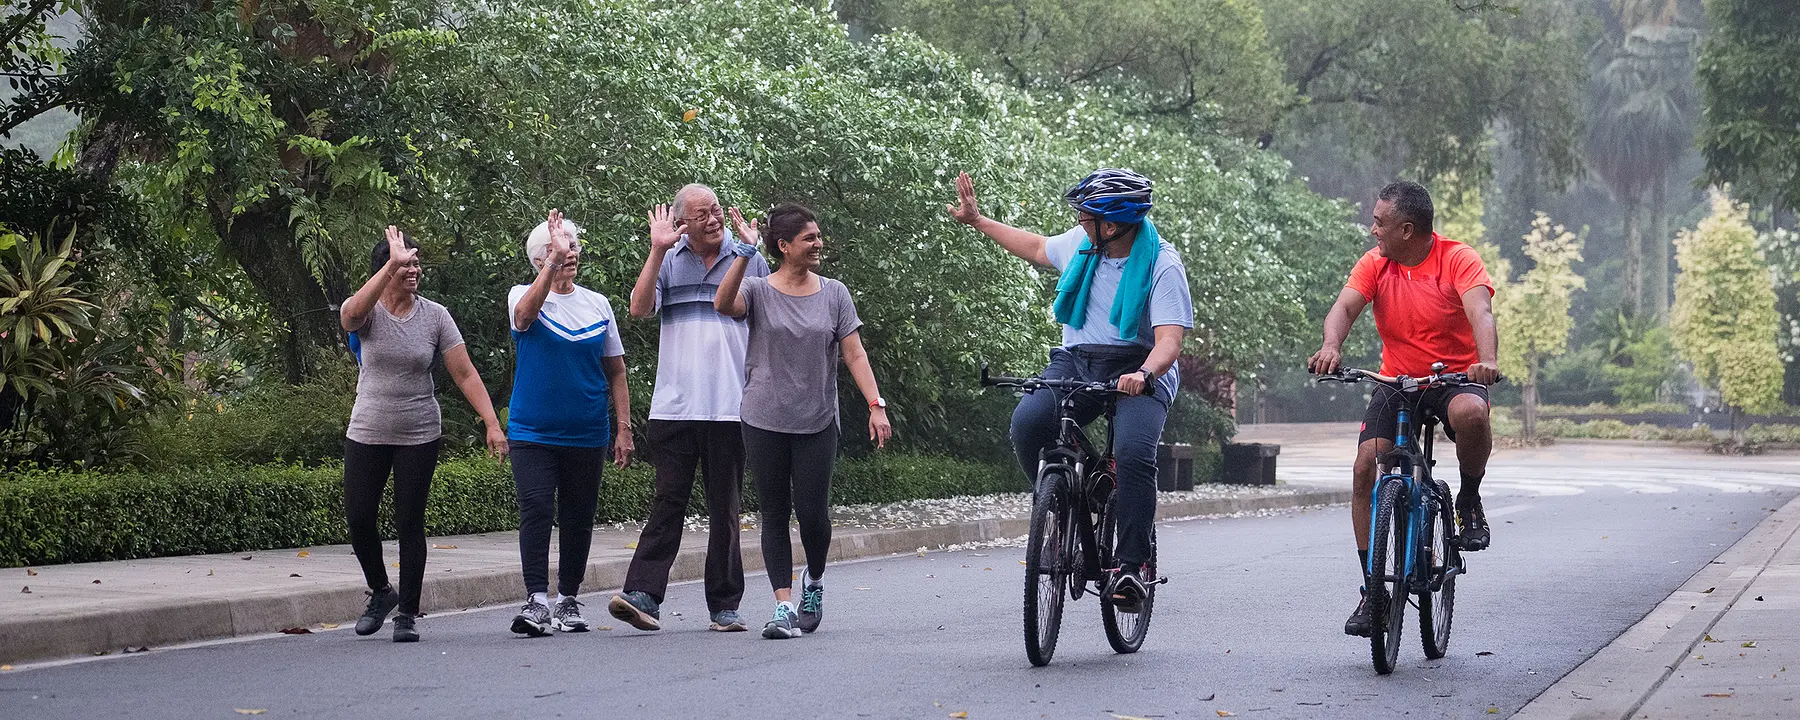 A group of adults walking in a city park wave at friends passing by on bicycles.